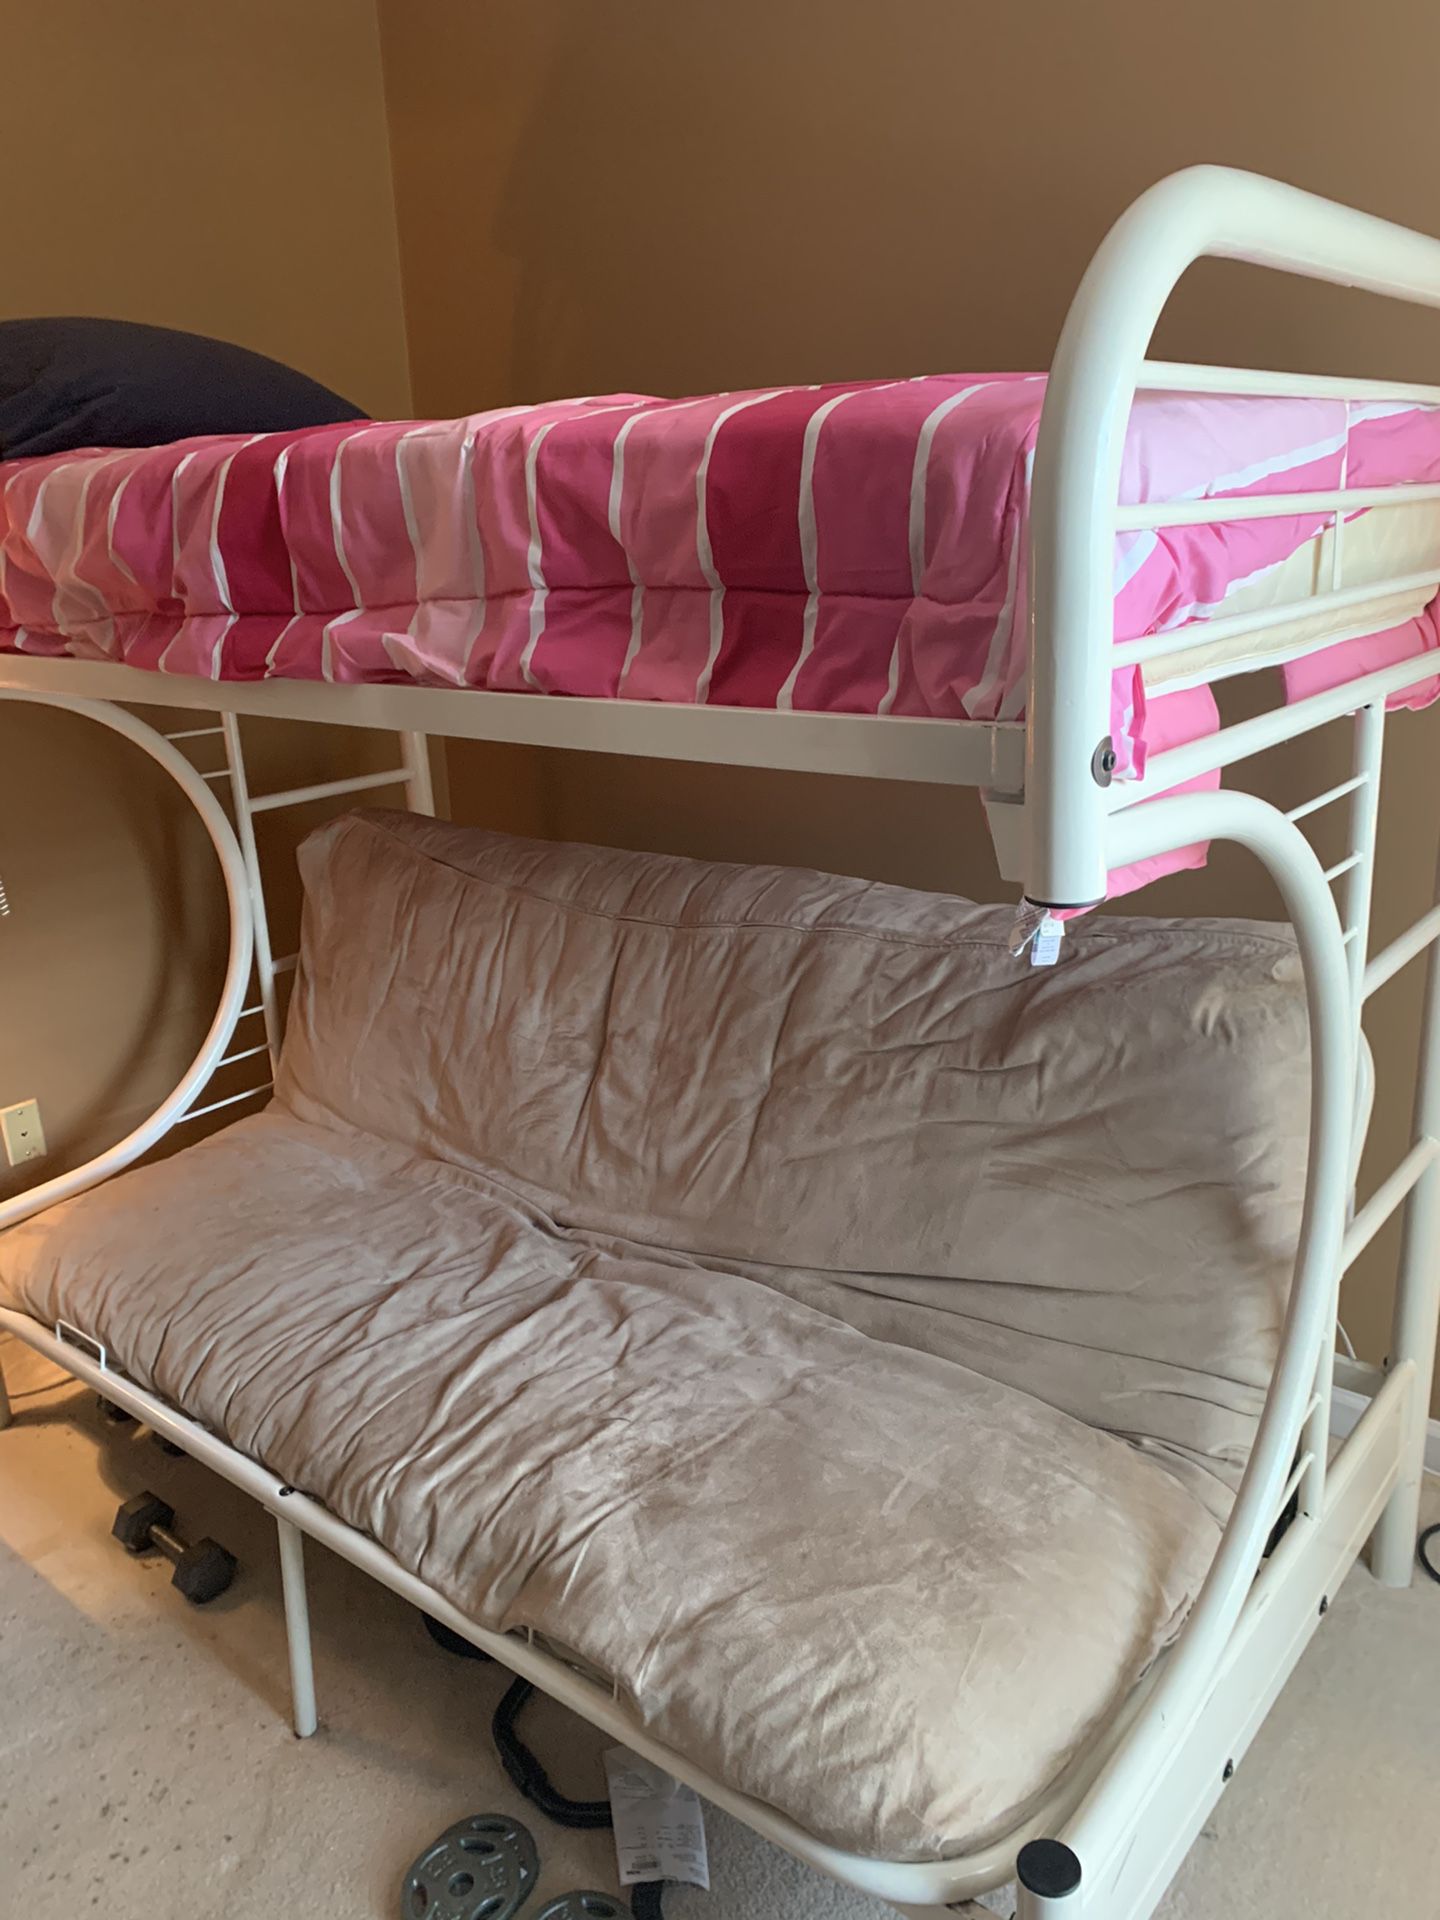 Twin mattress over full futon bunk bed—great for kids!